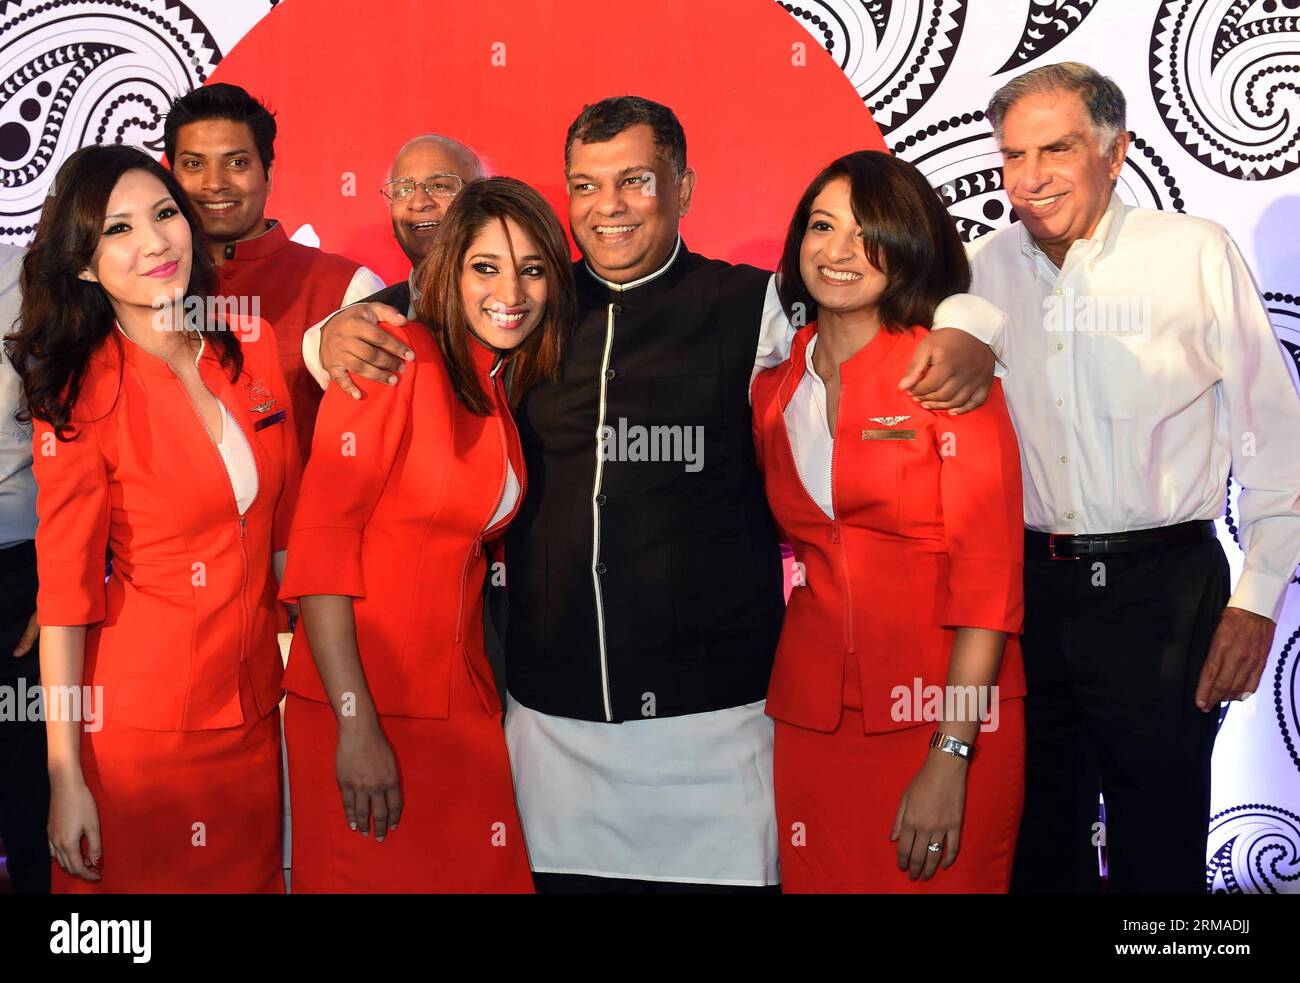 BANGALORE, July 3, 2014 (Xinhua) -- AirAsia s Chief Executive Officer Tony Fernandes (C) and Chairman Emeritus of India s Tata Sons Ltd Ratan Tata (1st R) pose with cabin crew during a press conference to celebrate the launch of Air Asia India in Bangalore, India, July 3, 2014. (Xinhua/Stringer) INDIA-BANGALORE-AIR ASIA PUBLICATIONxNOTxINxCHN   Bangalore July 3 2014 XINHUA AirAsia S Chief Executive Officer Tony Fernandes C and Chairman Emeritus of India S Tata Sons Ltd Ratan Tata 1st r Pose With Cabin Crew during a Press Conference to Celebrate The Launch of Air Asia India in Bangalore India J Stock Photo